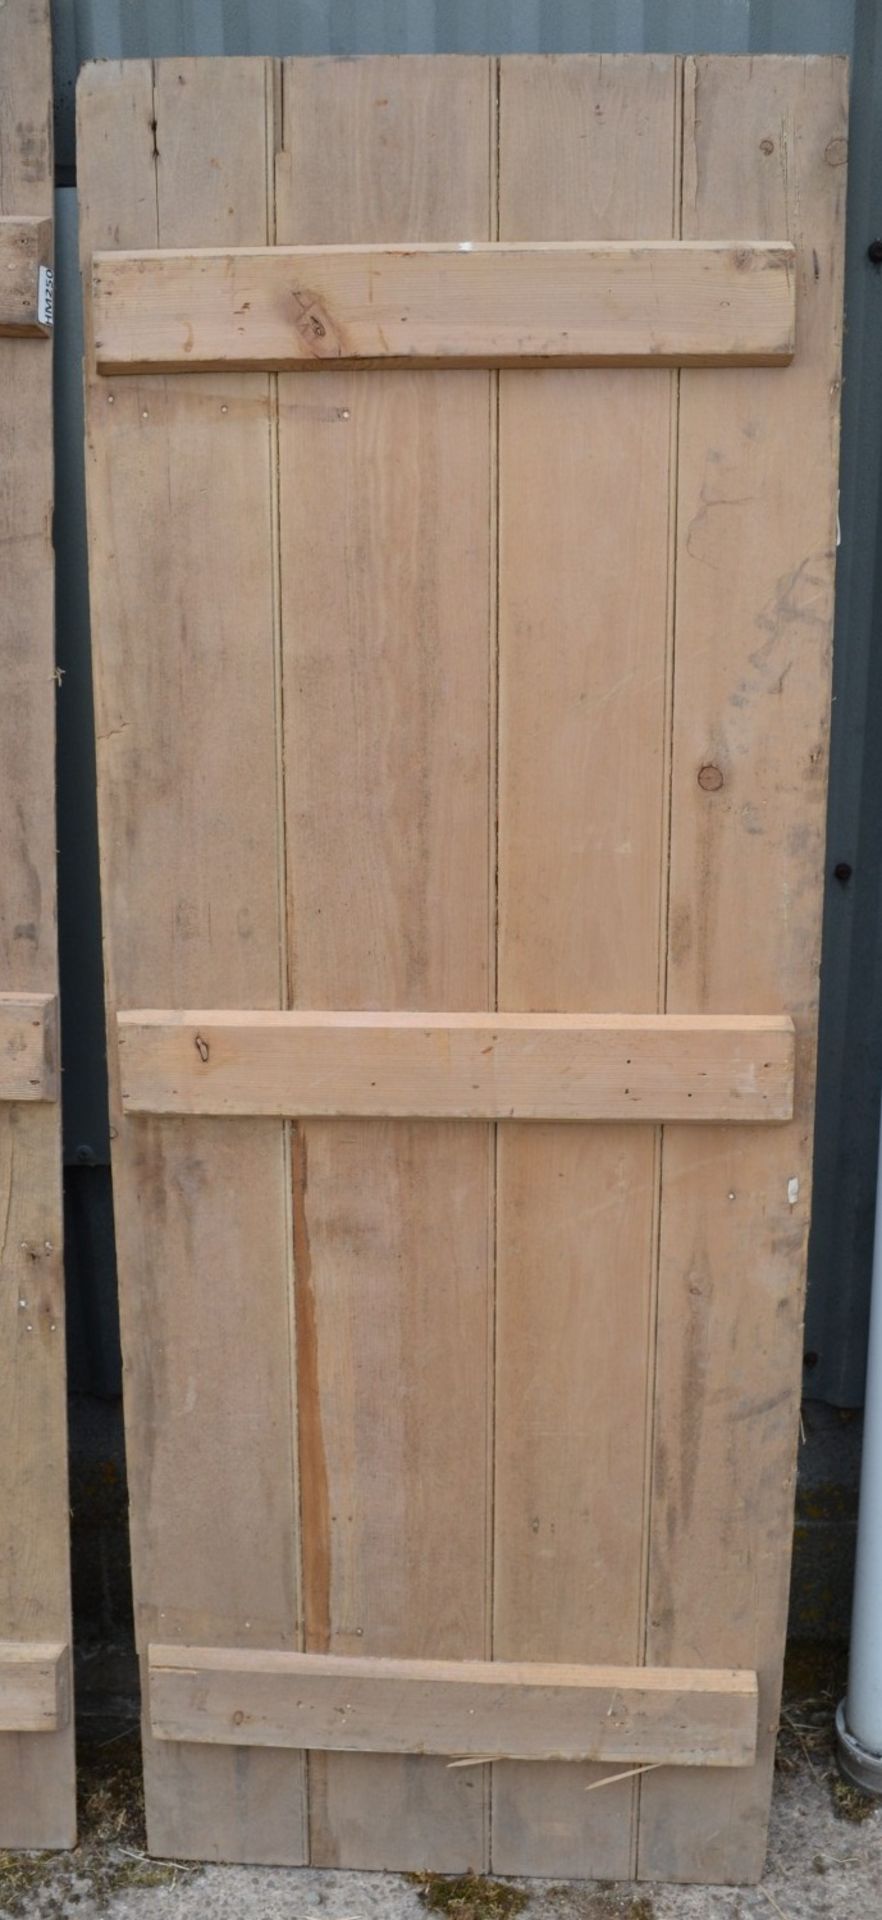 Set Of 4 x Reclaimed Unpainted Wooden Doors - Taken From A Grade II Listed Property - Image 7 of 8